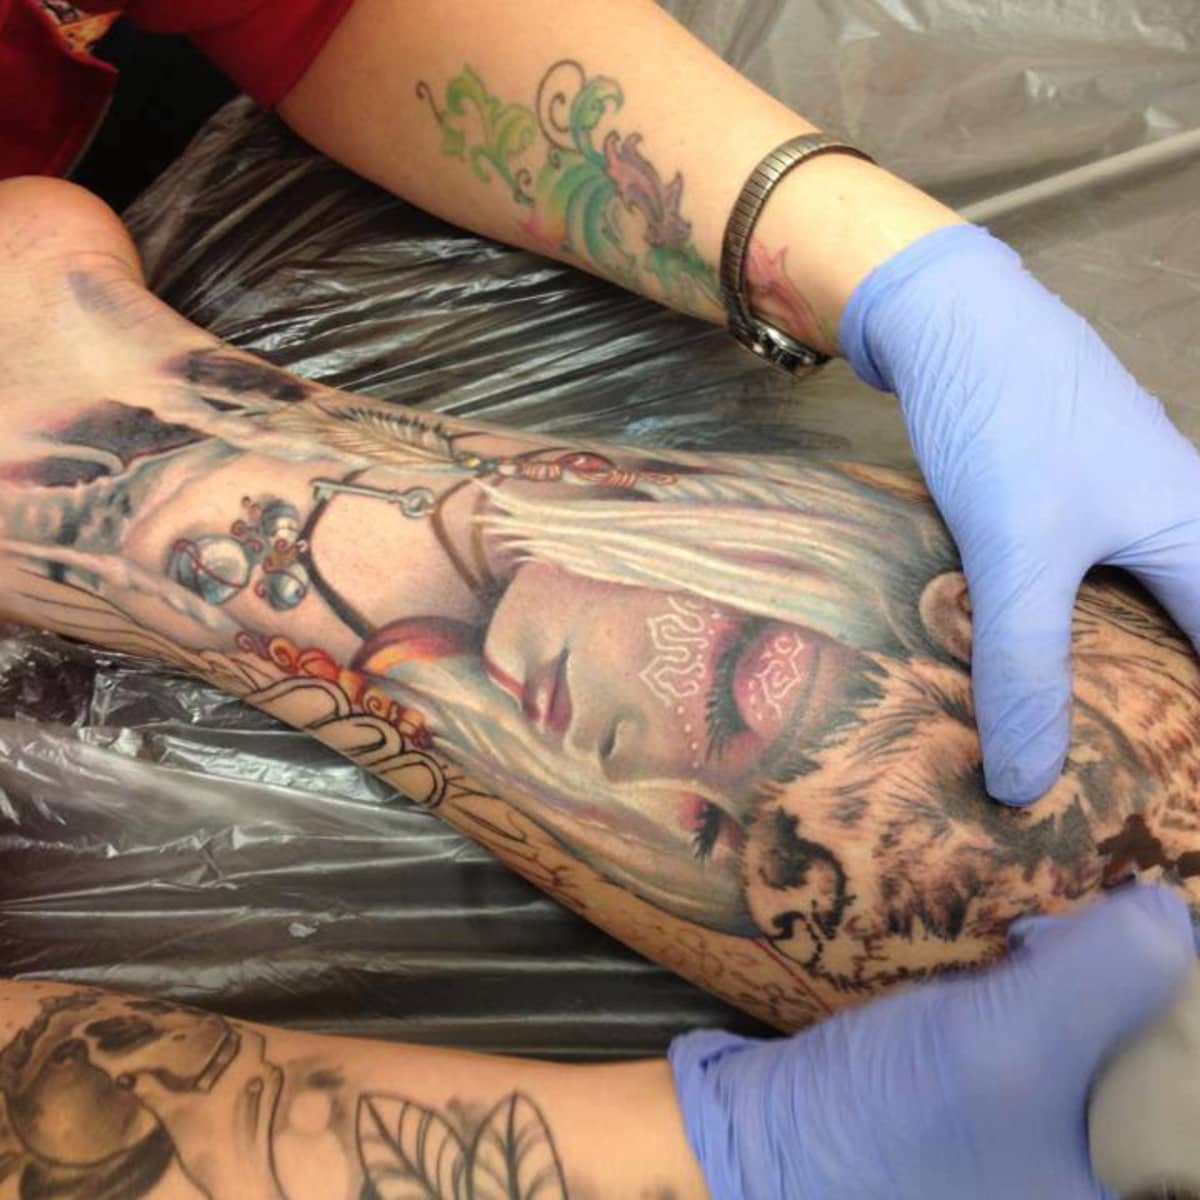 SICK MADE TATTOO PARLOR  Up movie tattoo done by SickMadeArtist